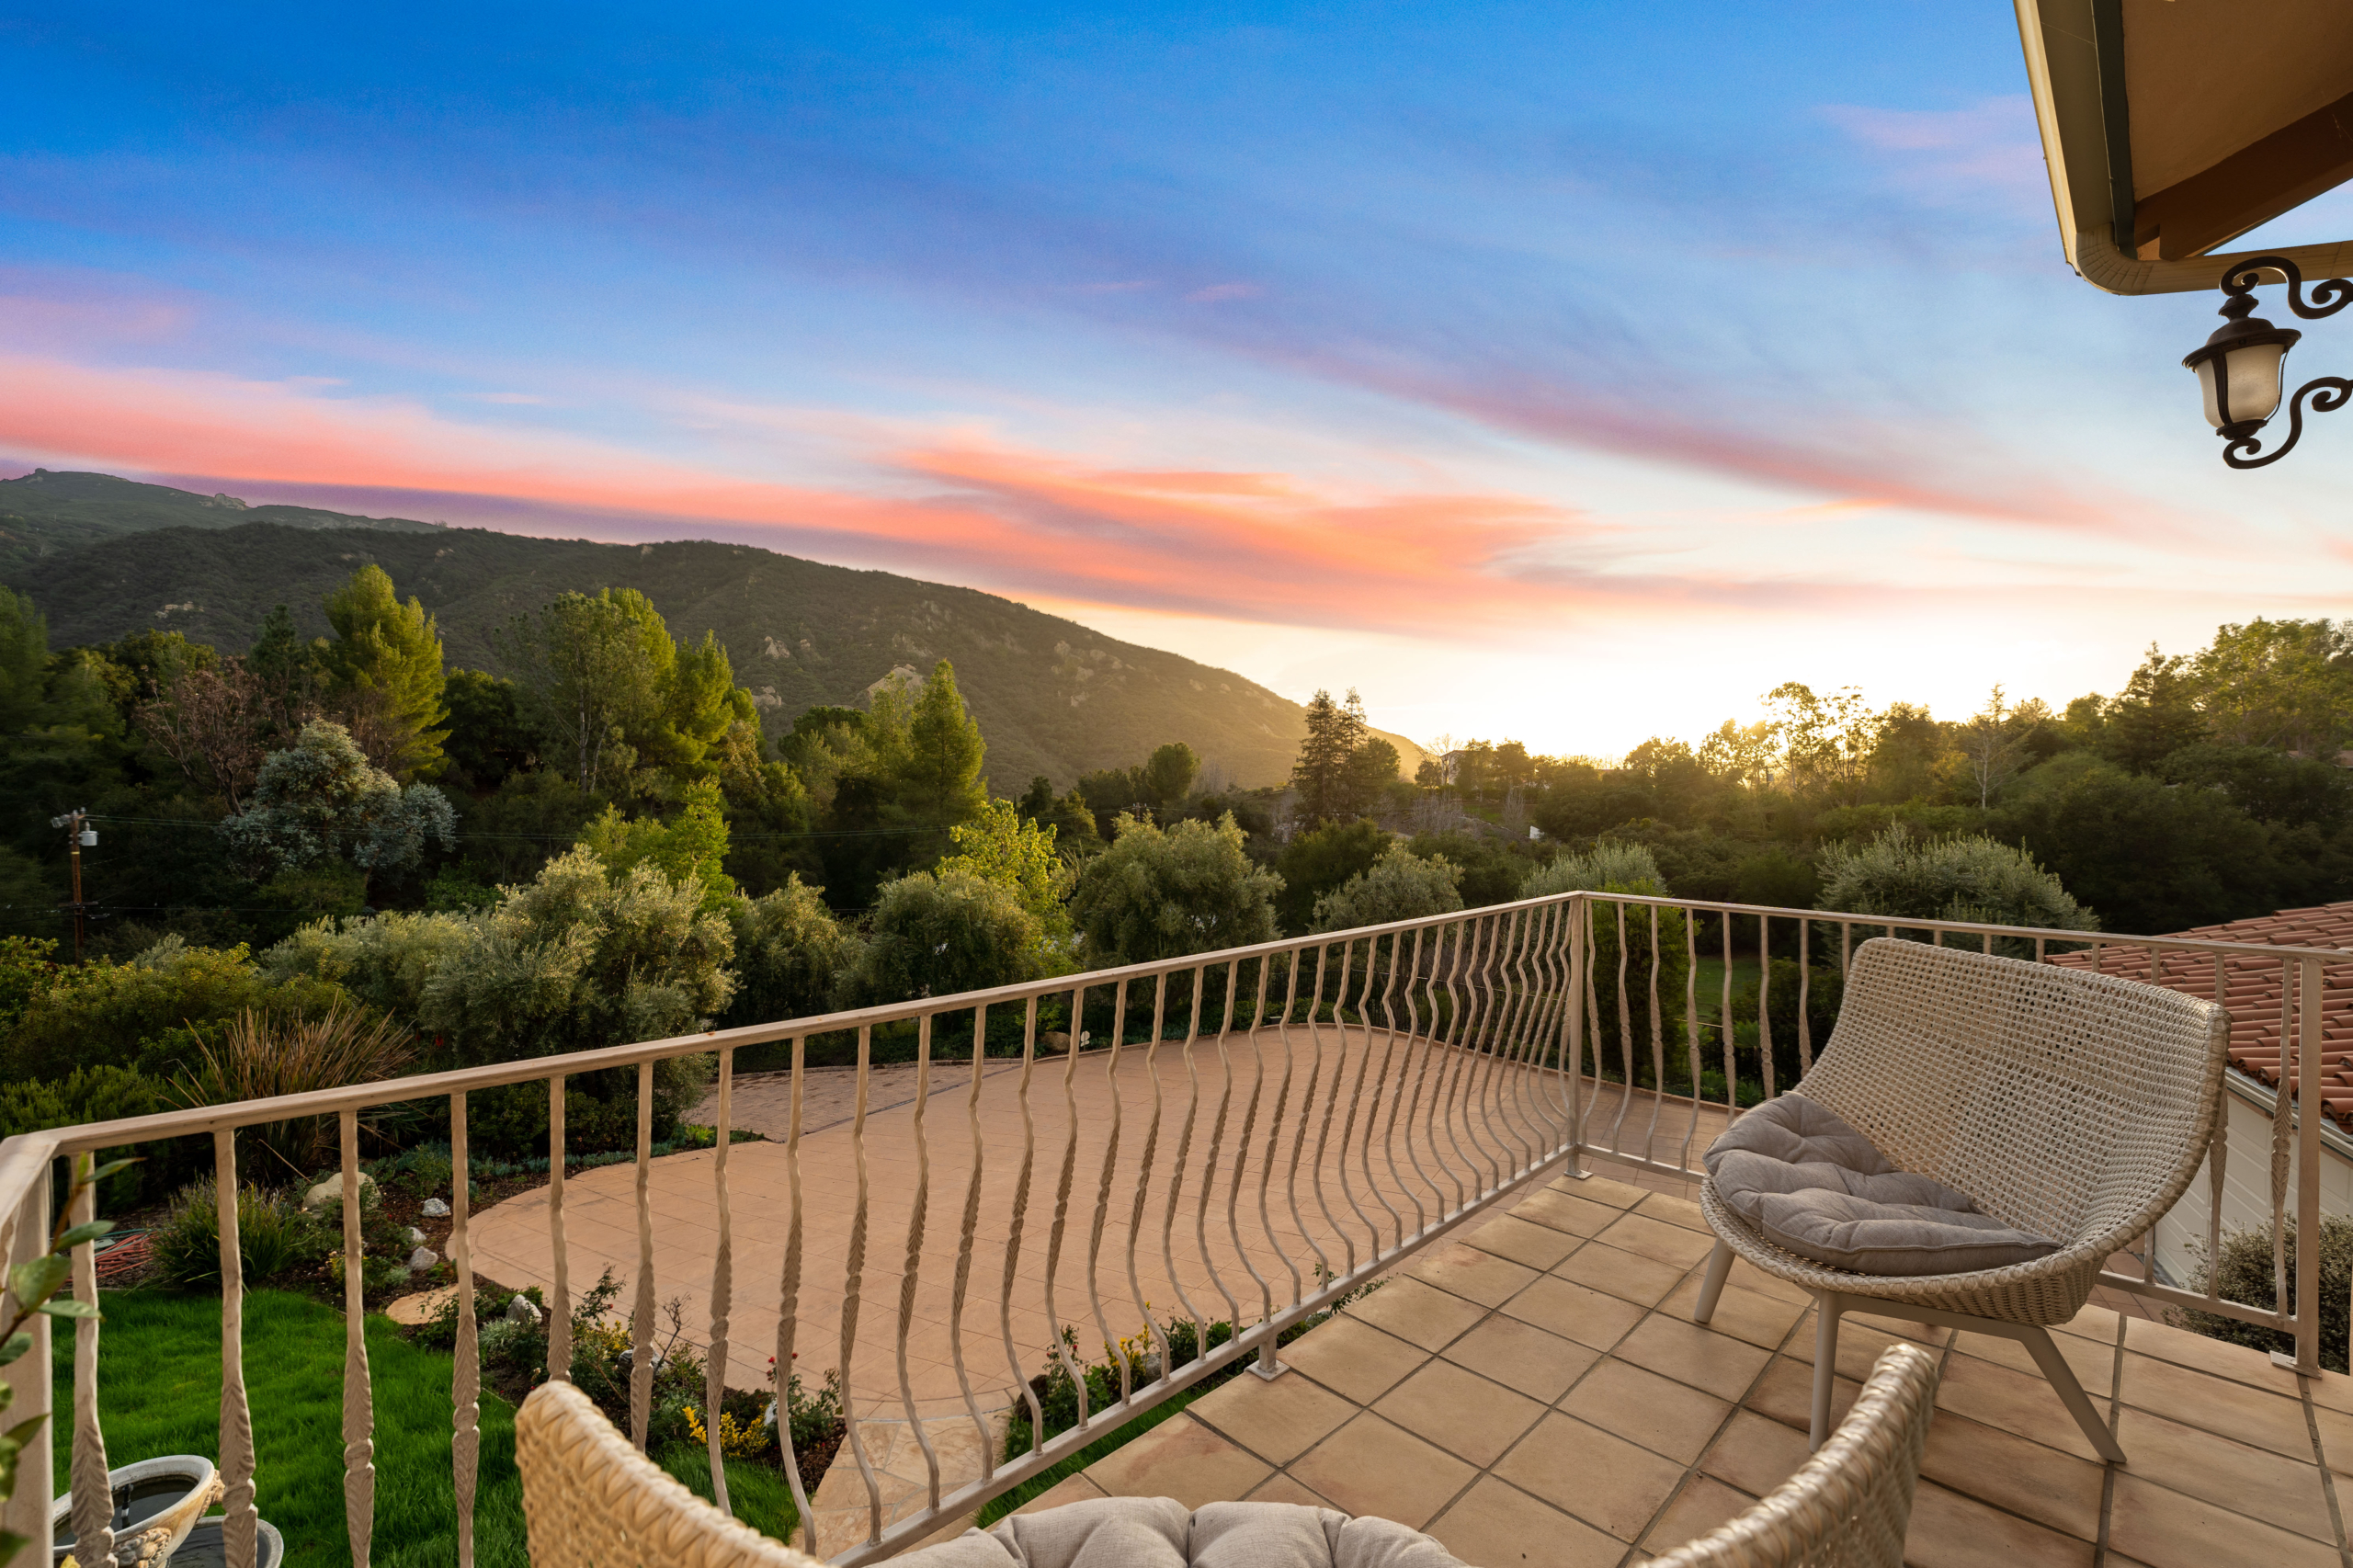 Balcony view of a house property with woven chair, and trees at 2175 Cold Canyon Road Calabasas